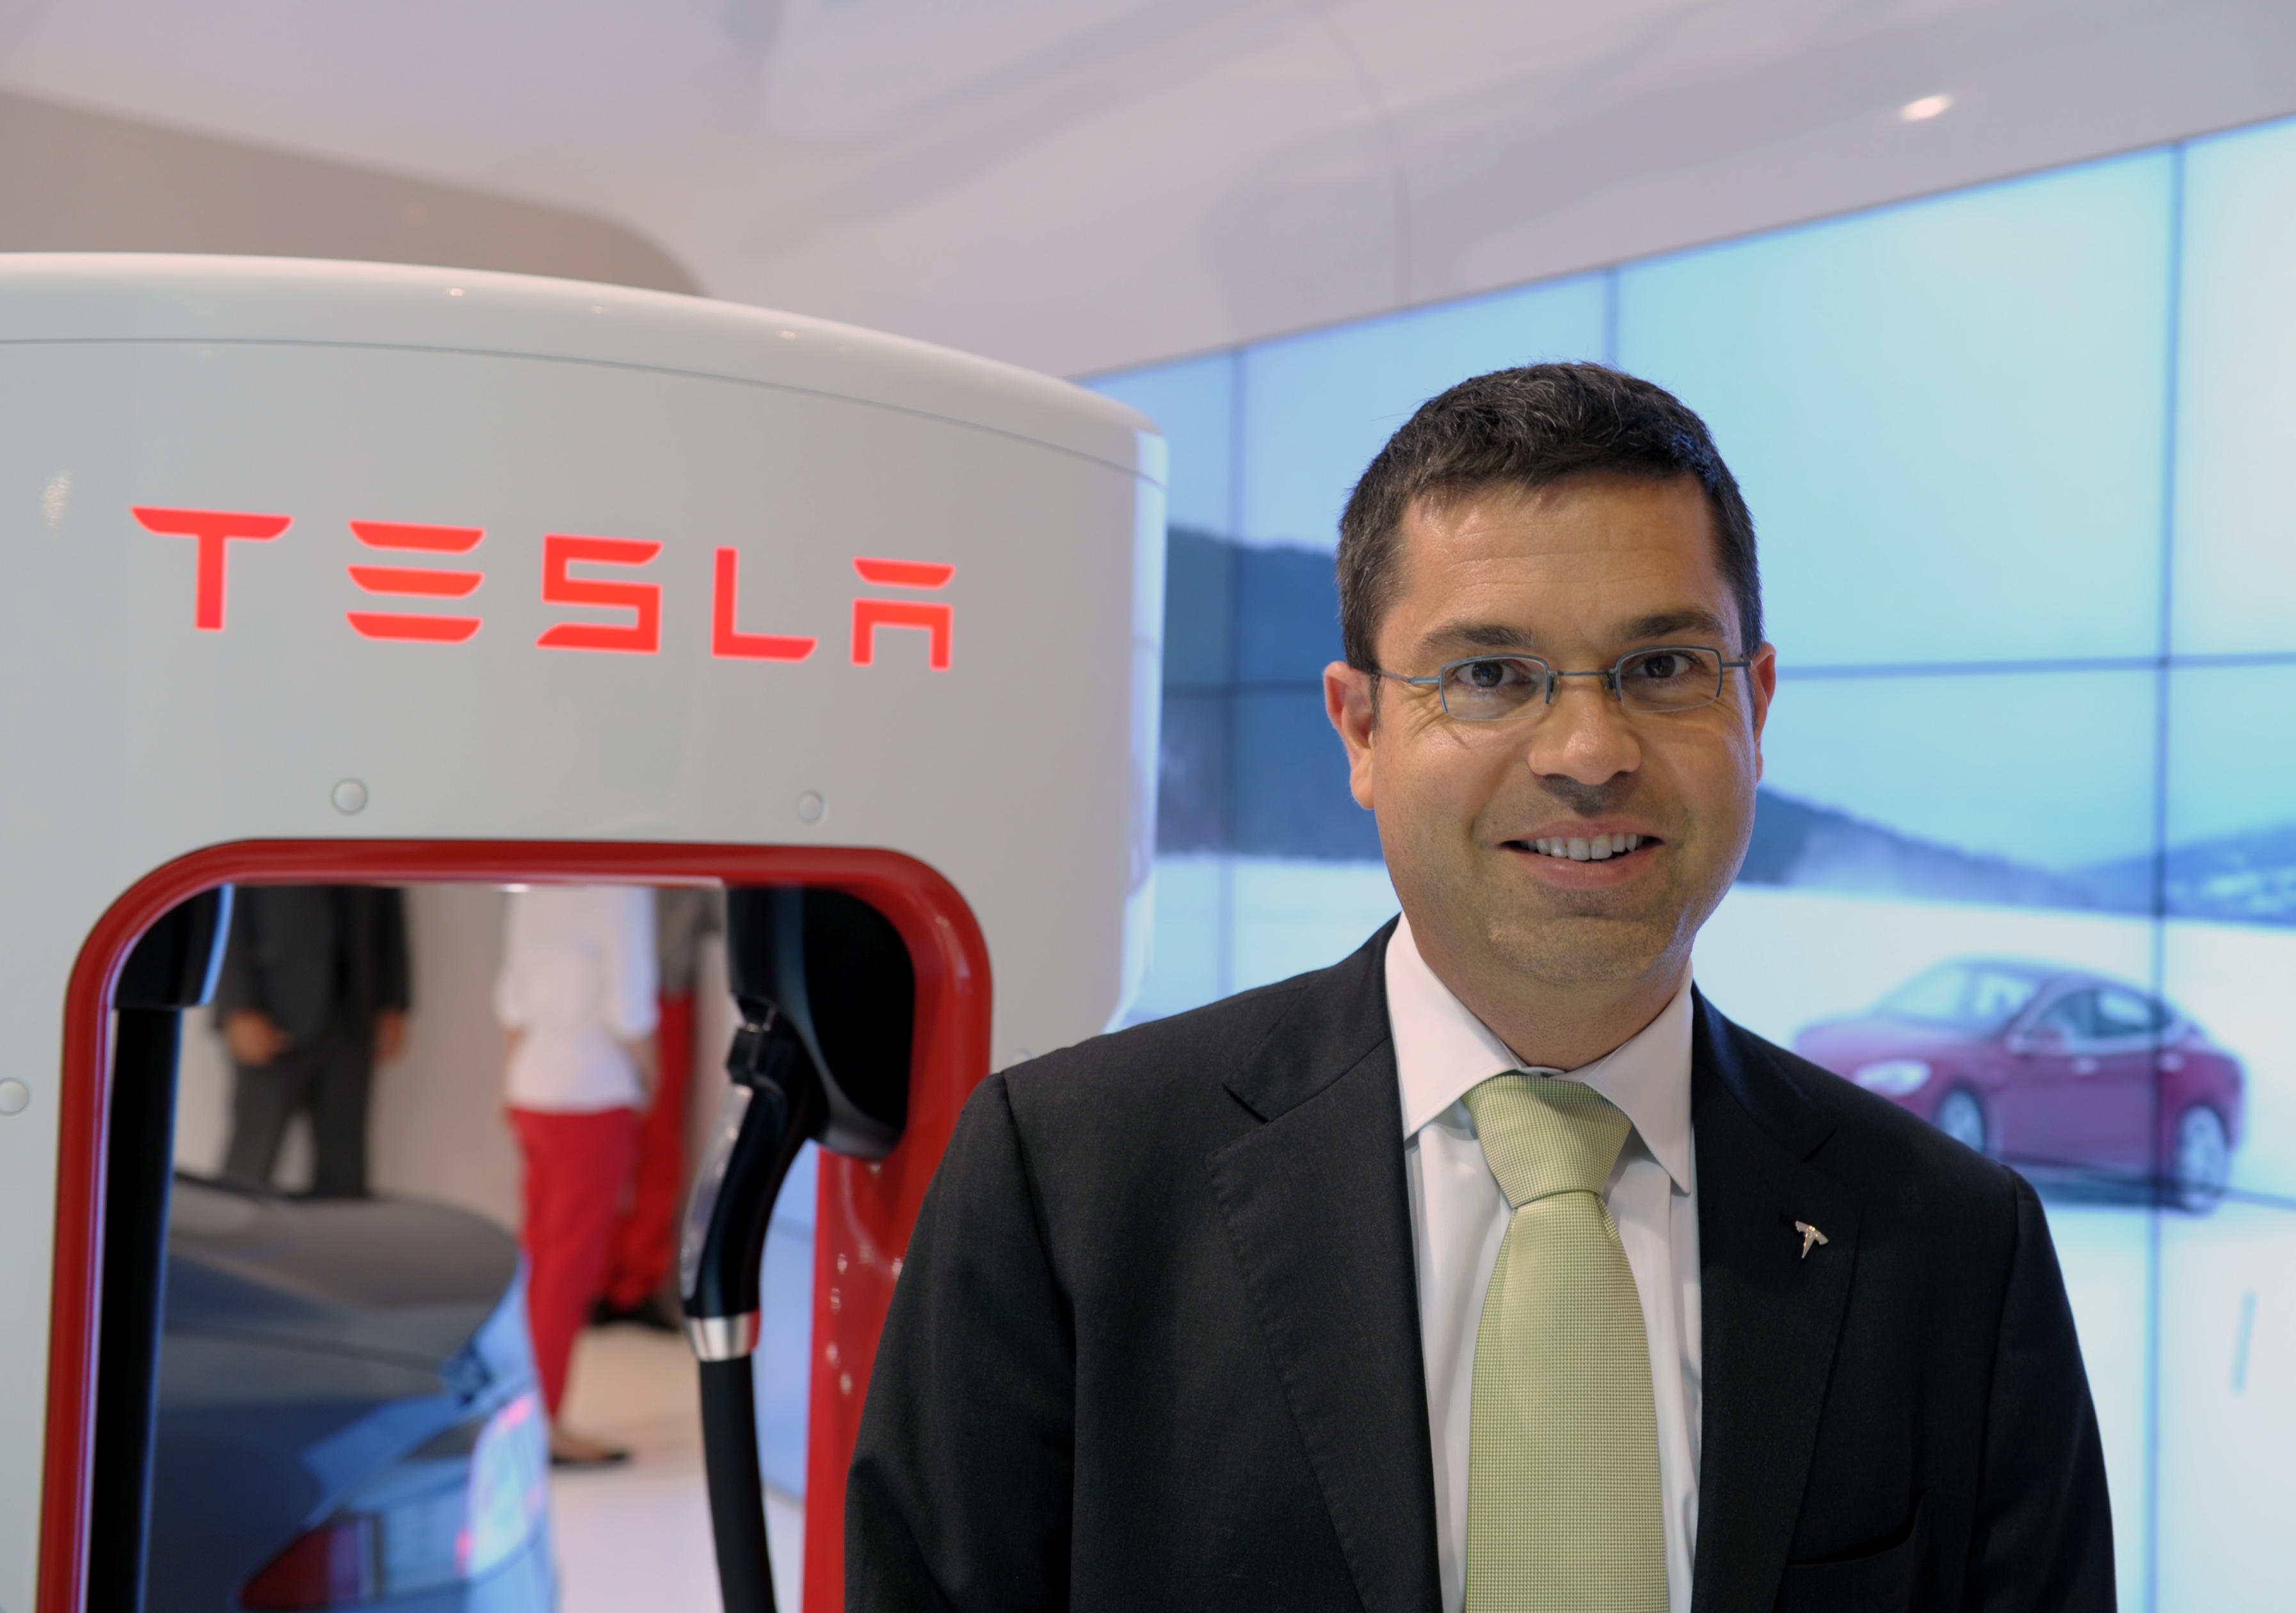 Tesla President of Automotive Jerome Guillen named to lead trucking